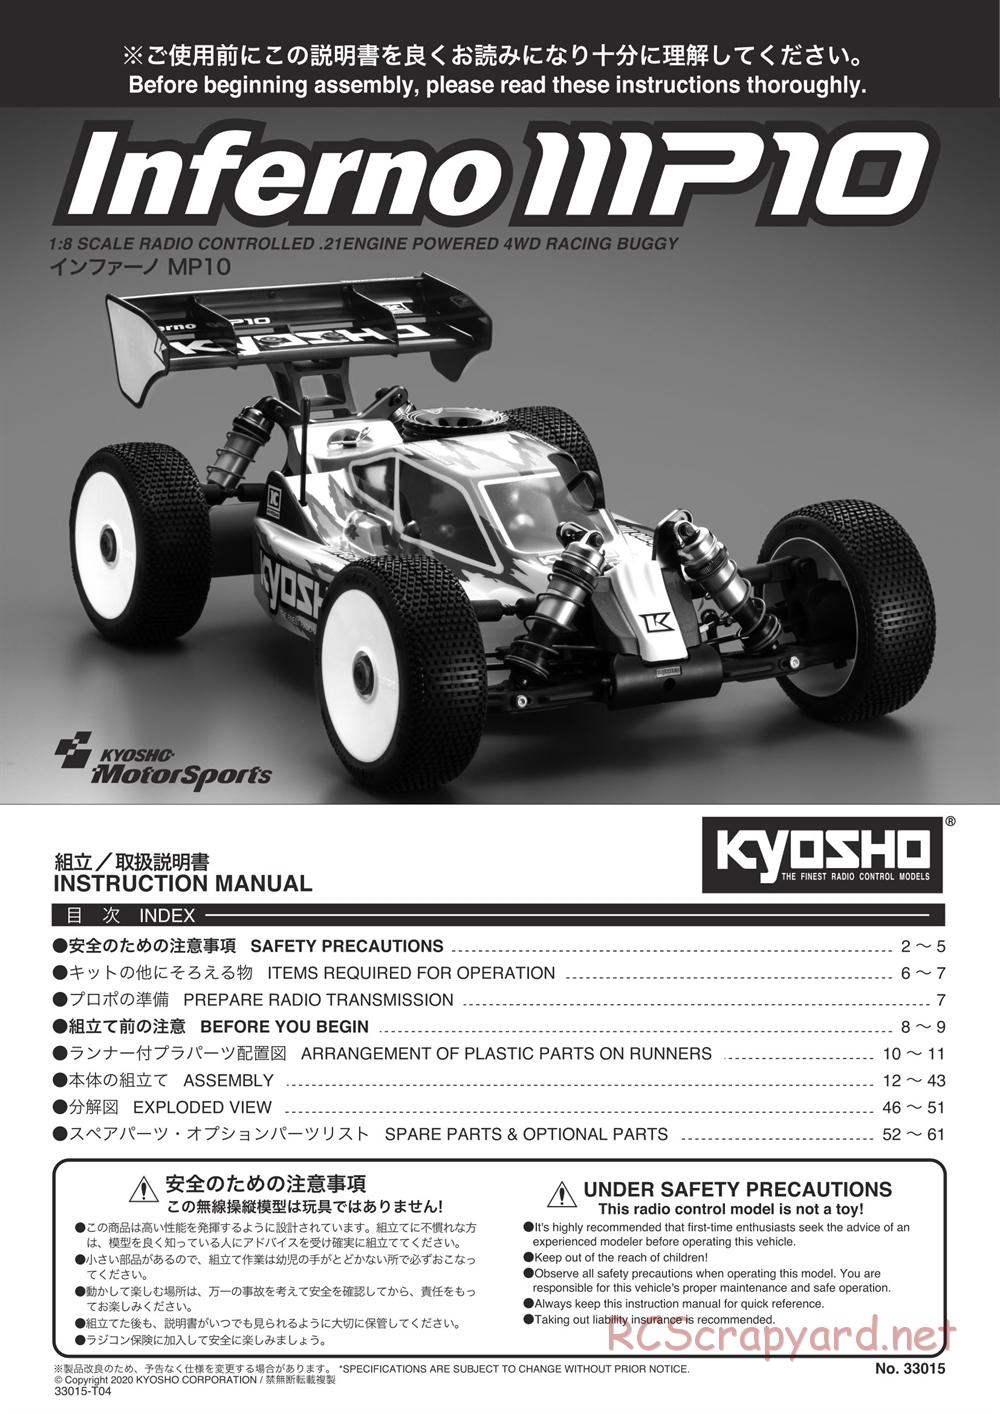 Kyosho - Inferno MP10 - Manual - Page 1